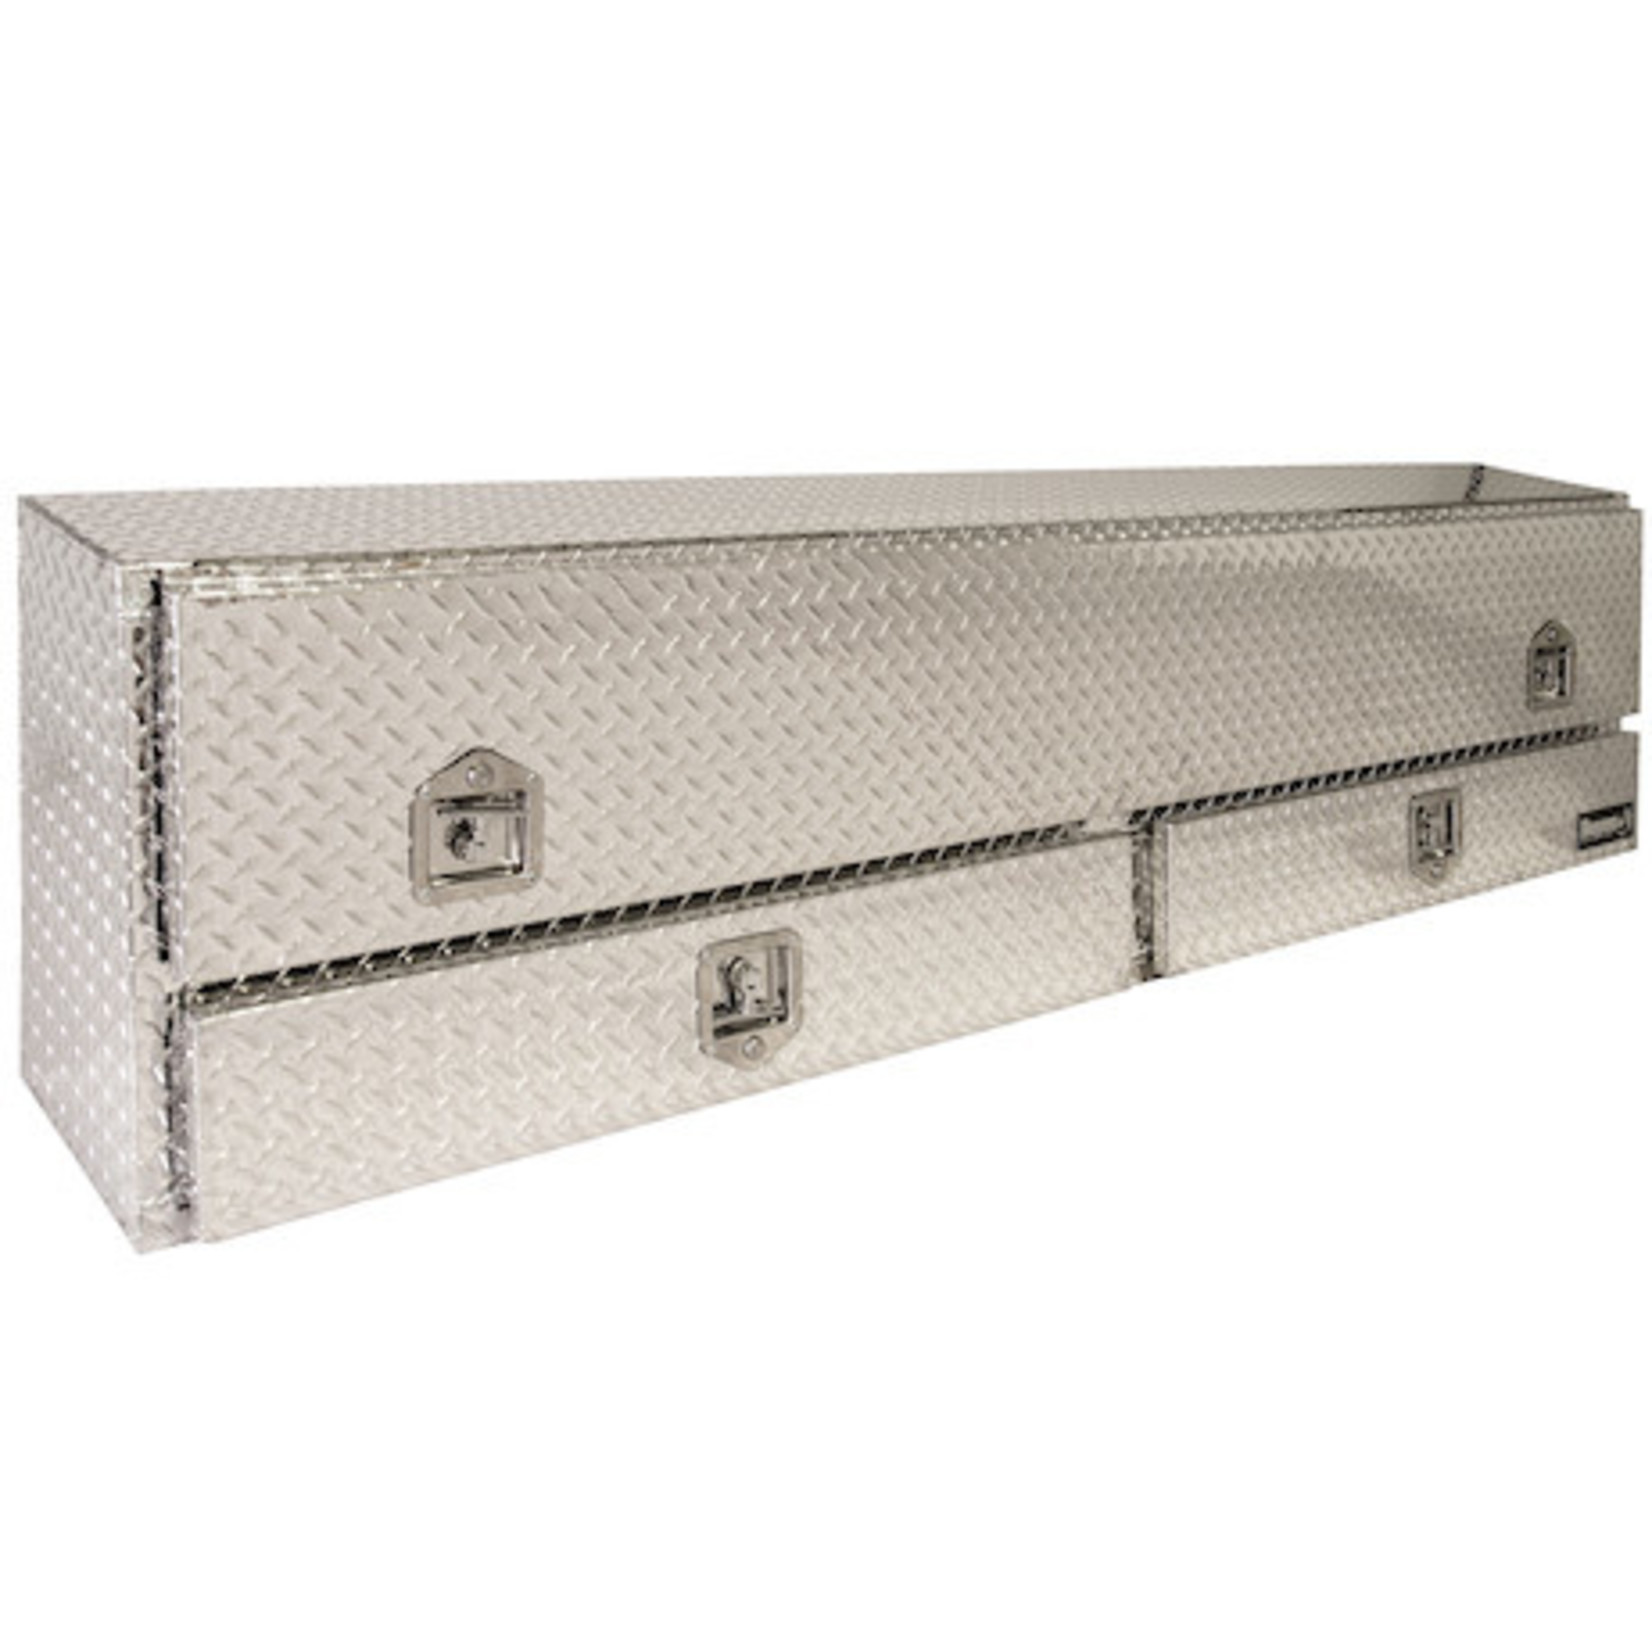 Buyers Products Company Diamond Tread Aluminum Contractor Truck Box with Lower Drawers Series